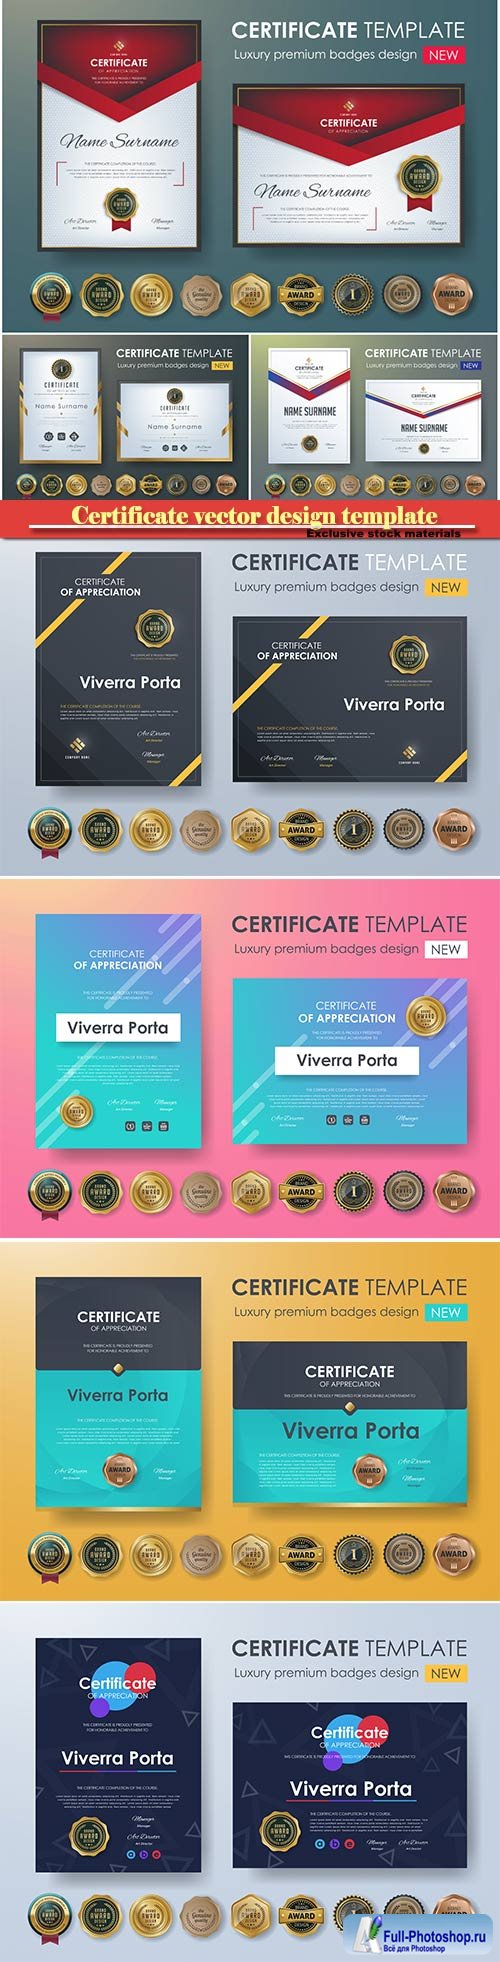 Certificate and vector diploma design template # 39